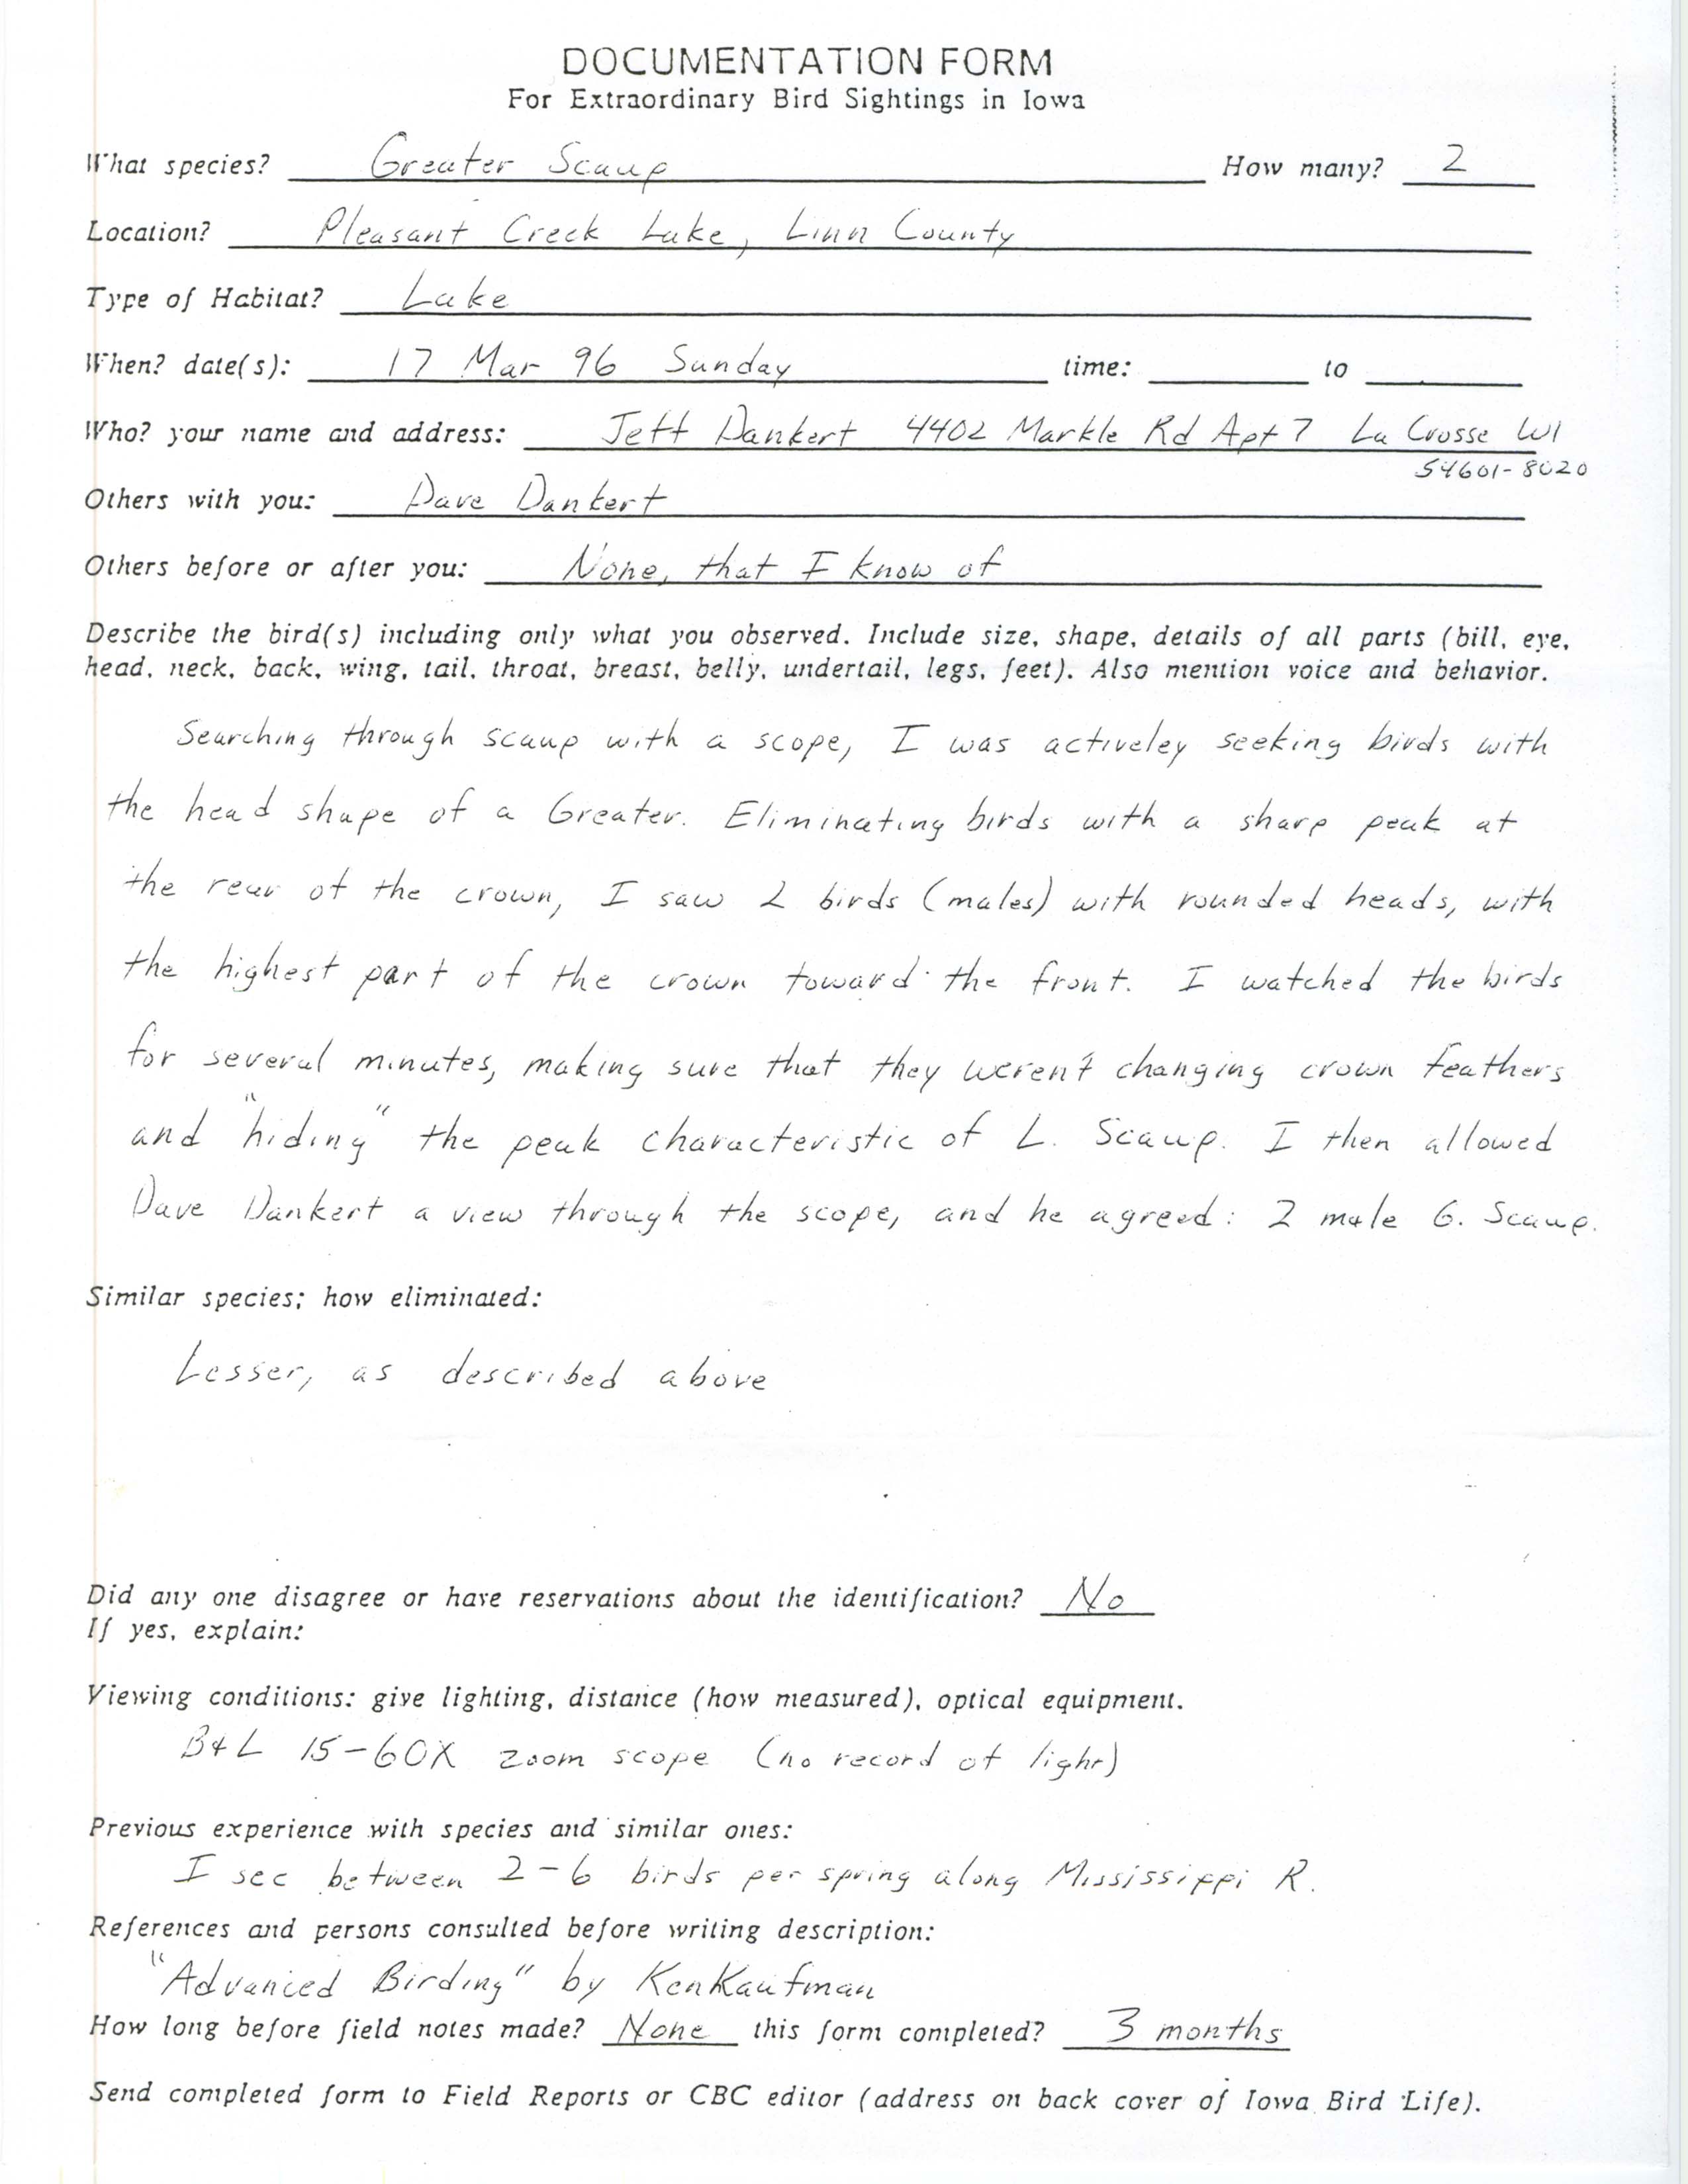 Rare bird documentation form for Greater Scaup at Pleasant Creek Lake, 1996